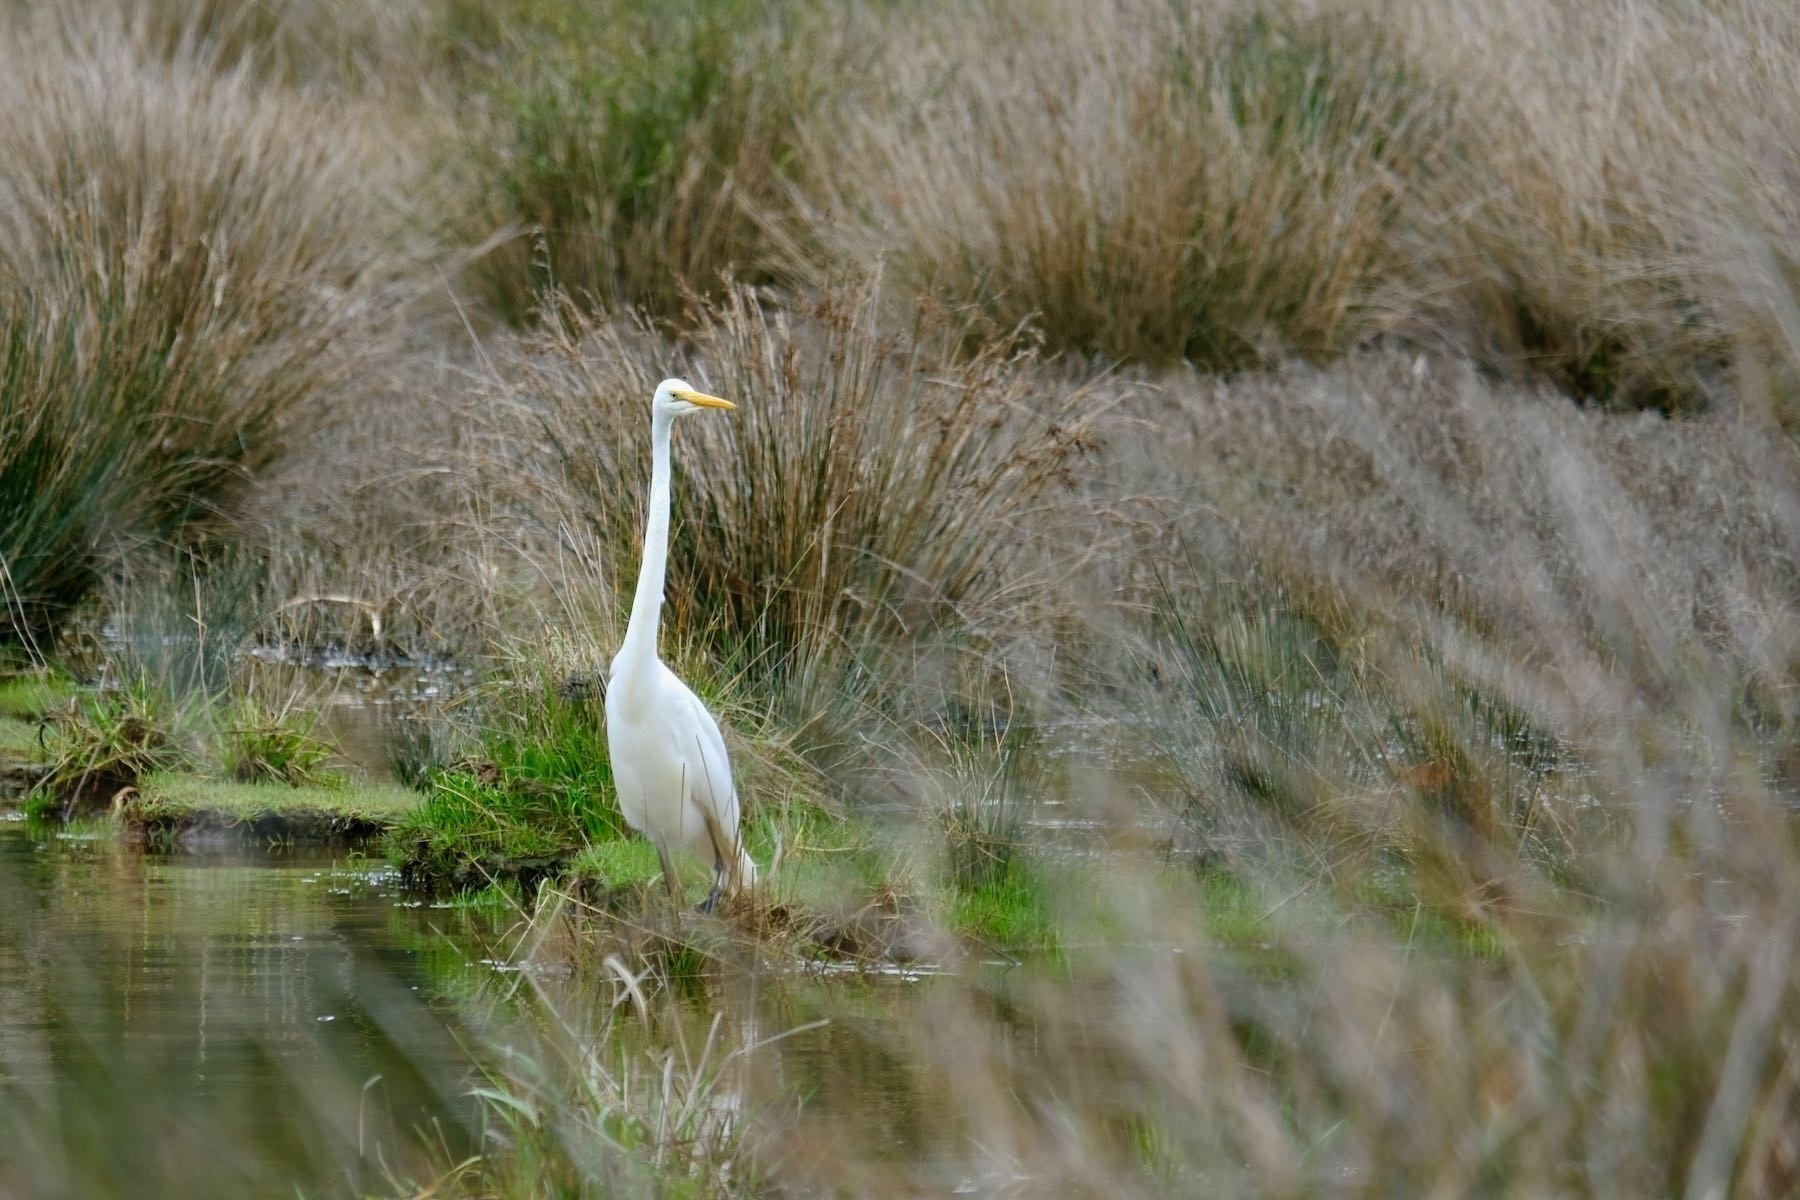 Very large white bird at water’s edge, with neck extended. 